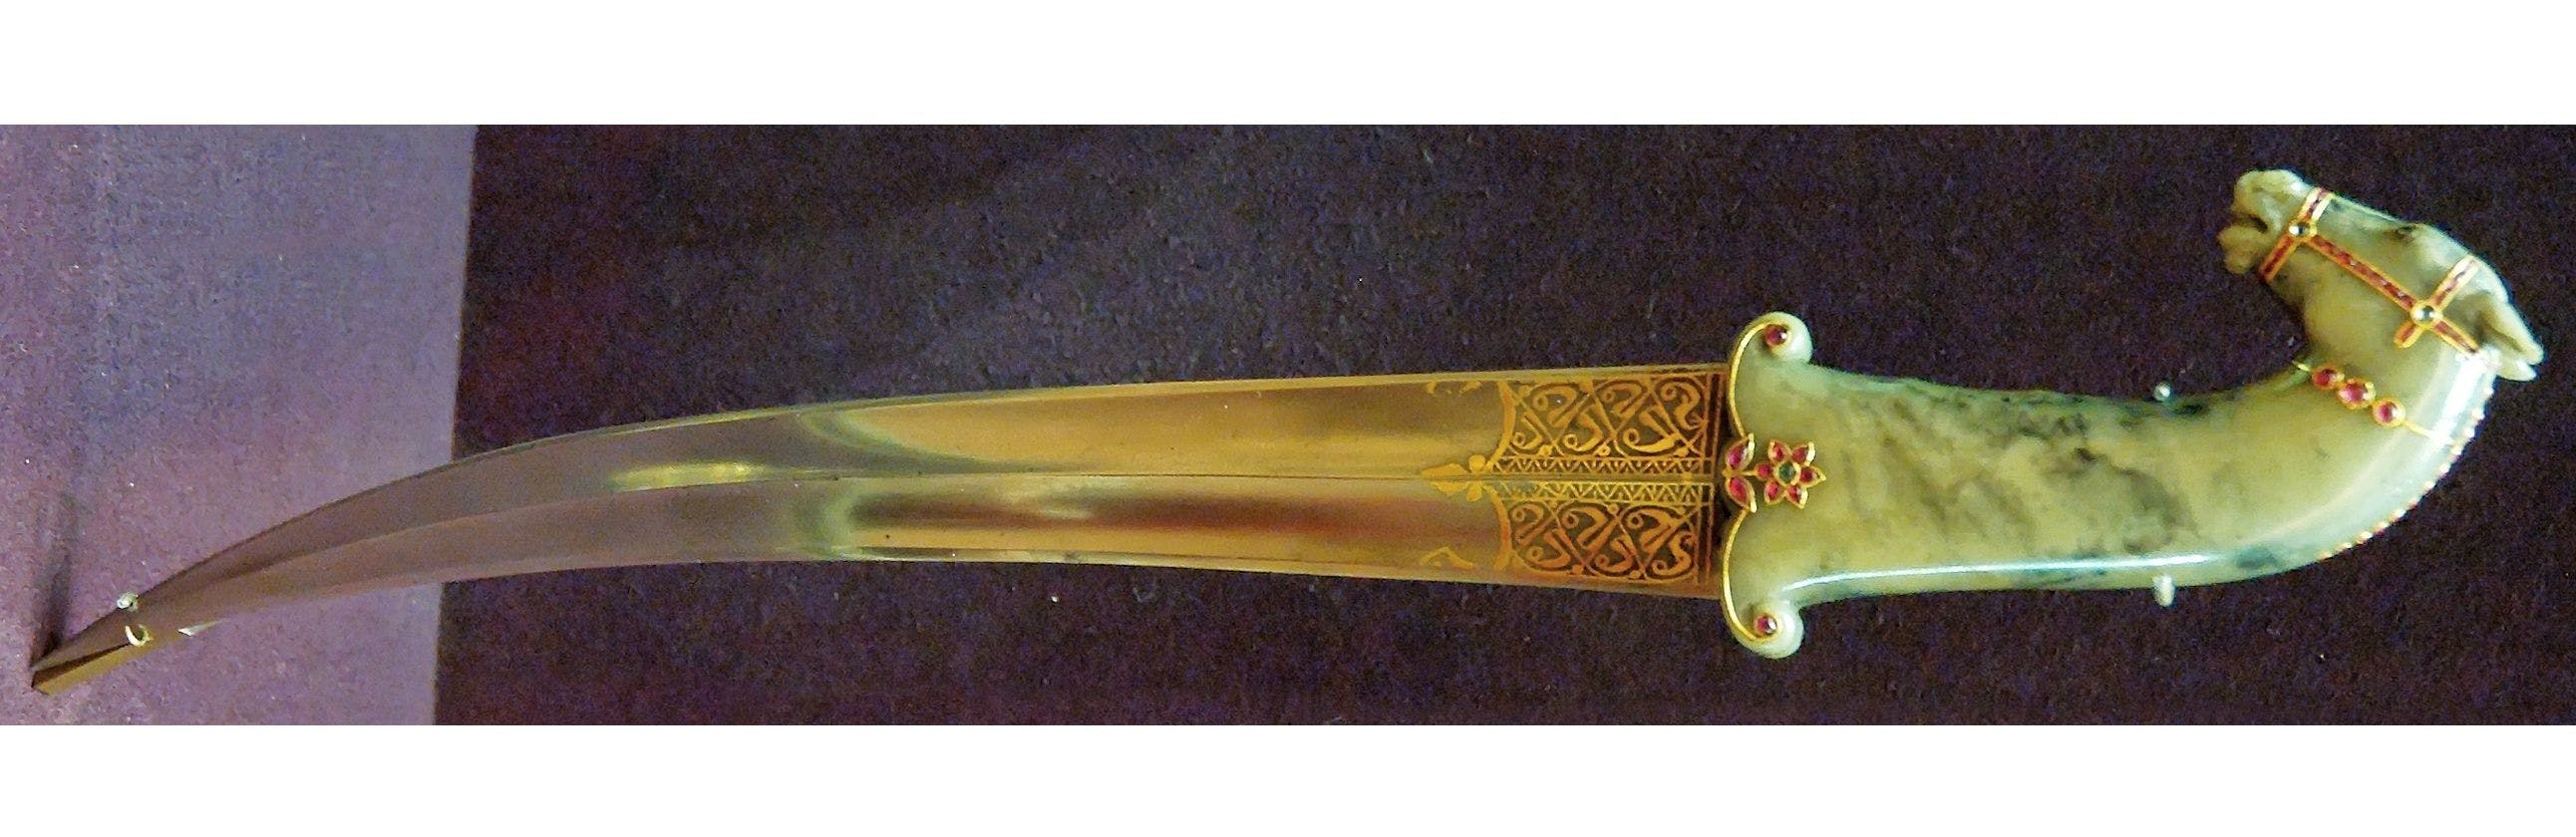 A Mughal dagger with a Damascus steel blade in the Louvre Museum